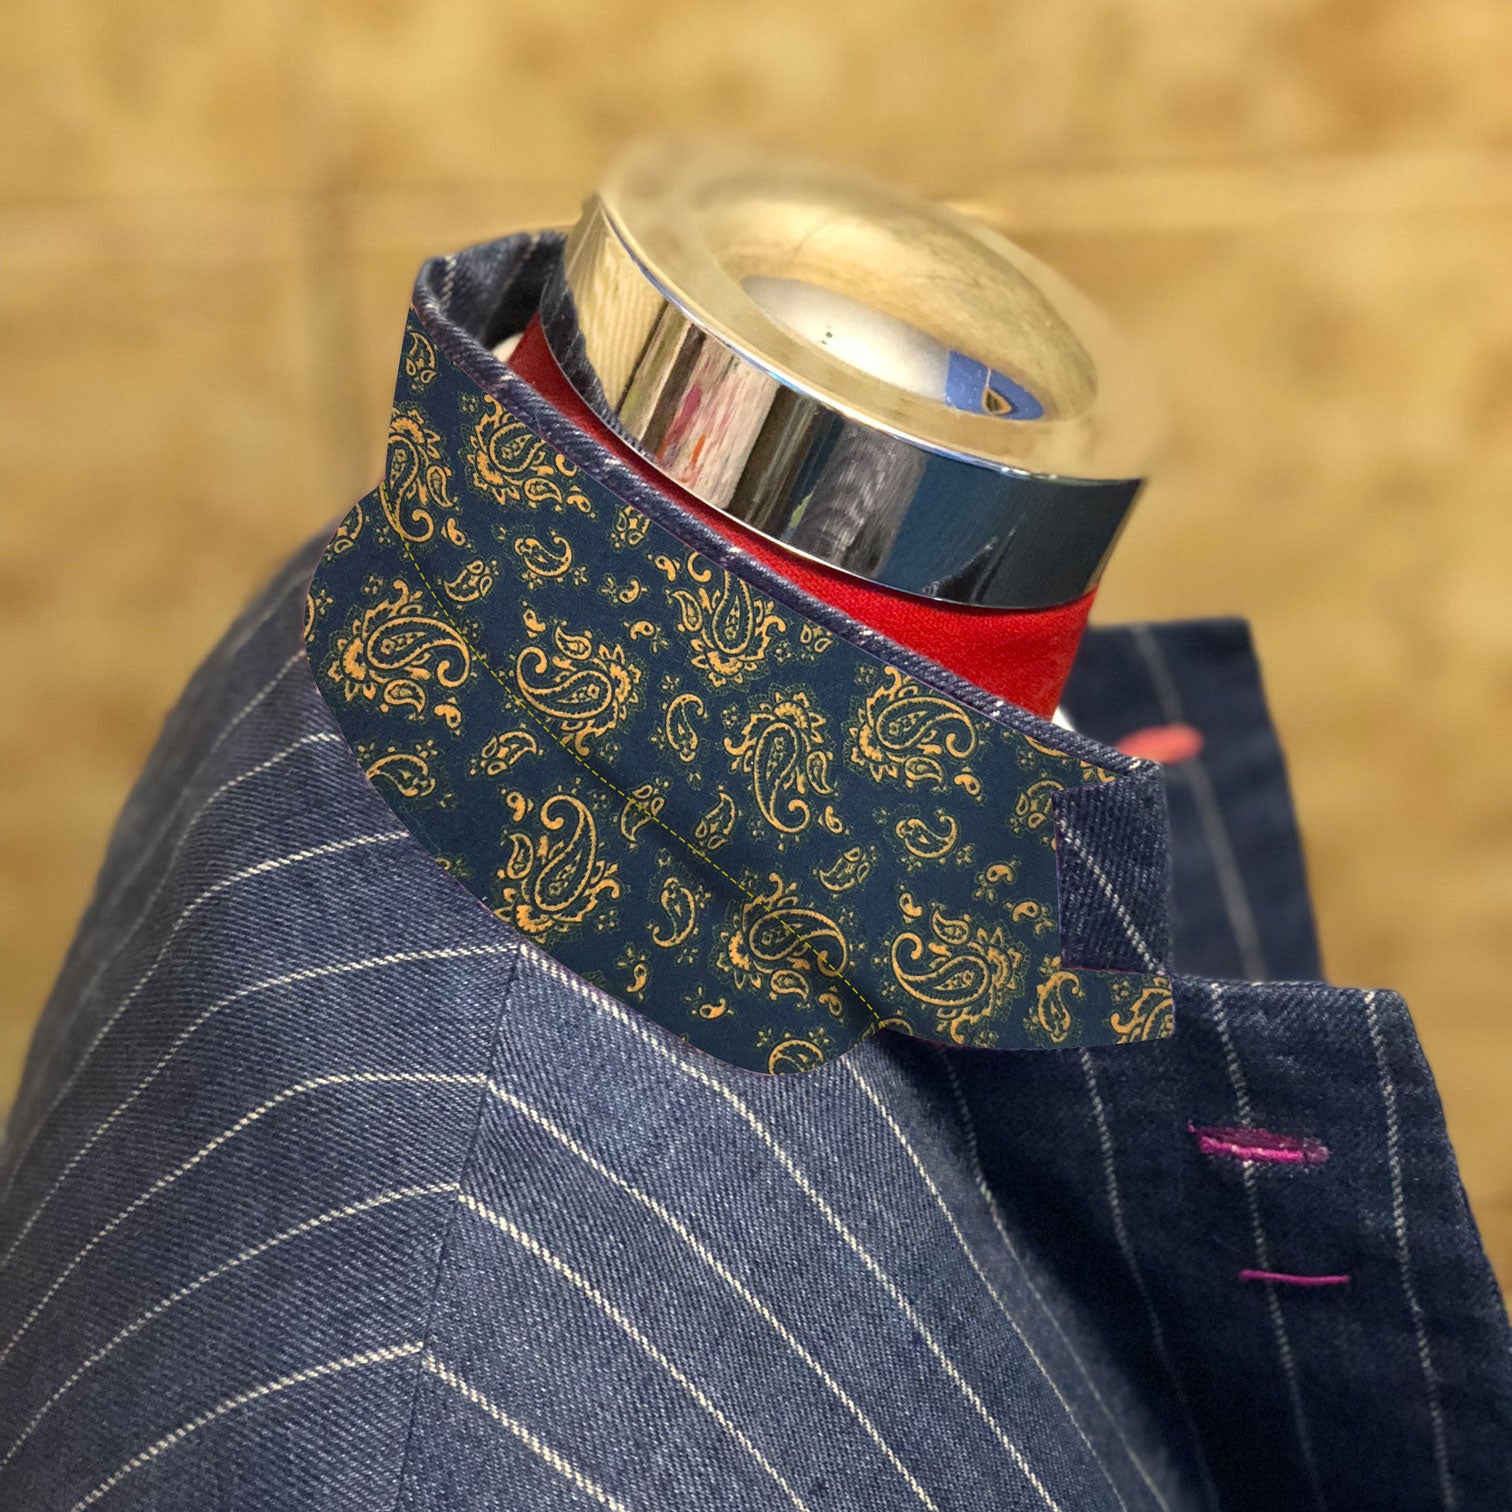 HUBERROSS Luxurious Felt for Jackets Undercollar Design F001 Paisley Gold on Navy Wool and Viscose . Made in Italy